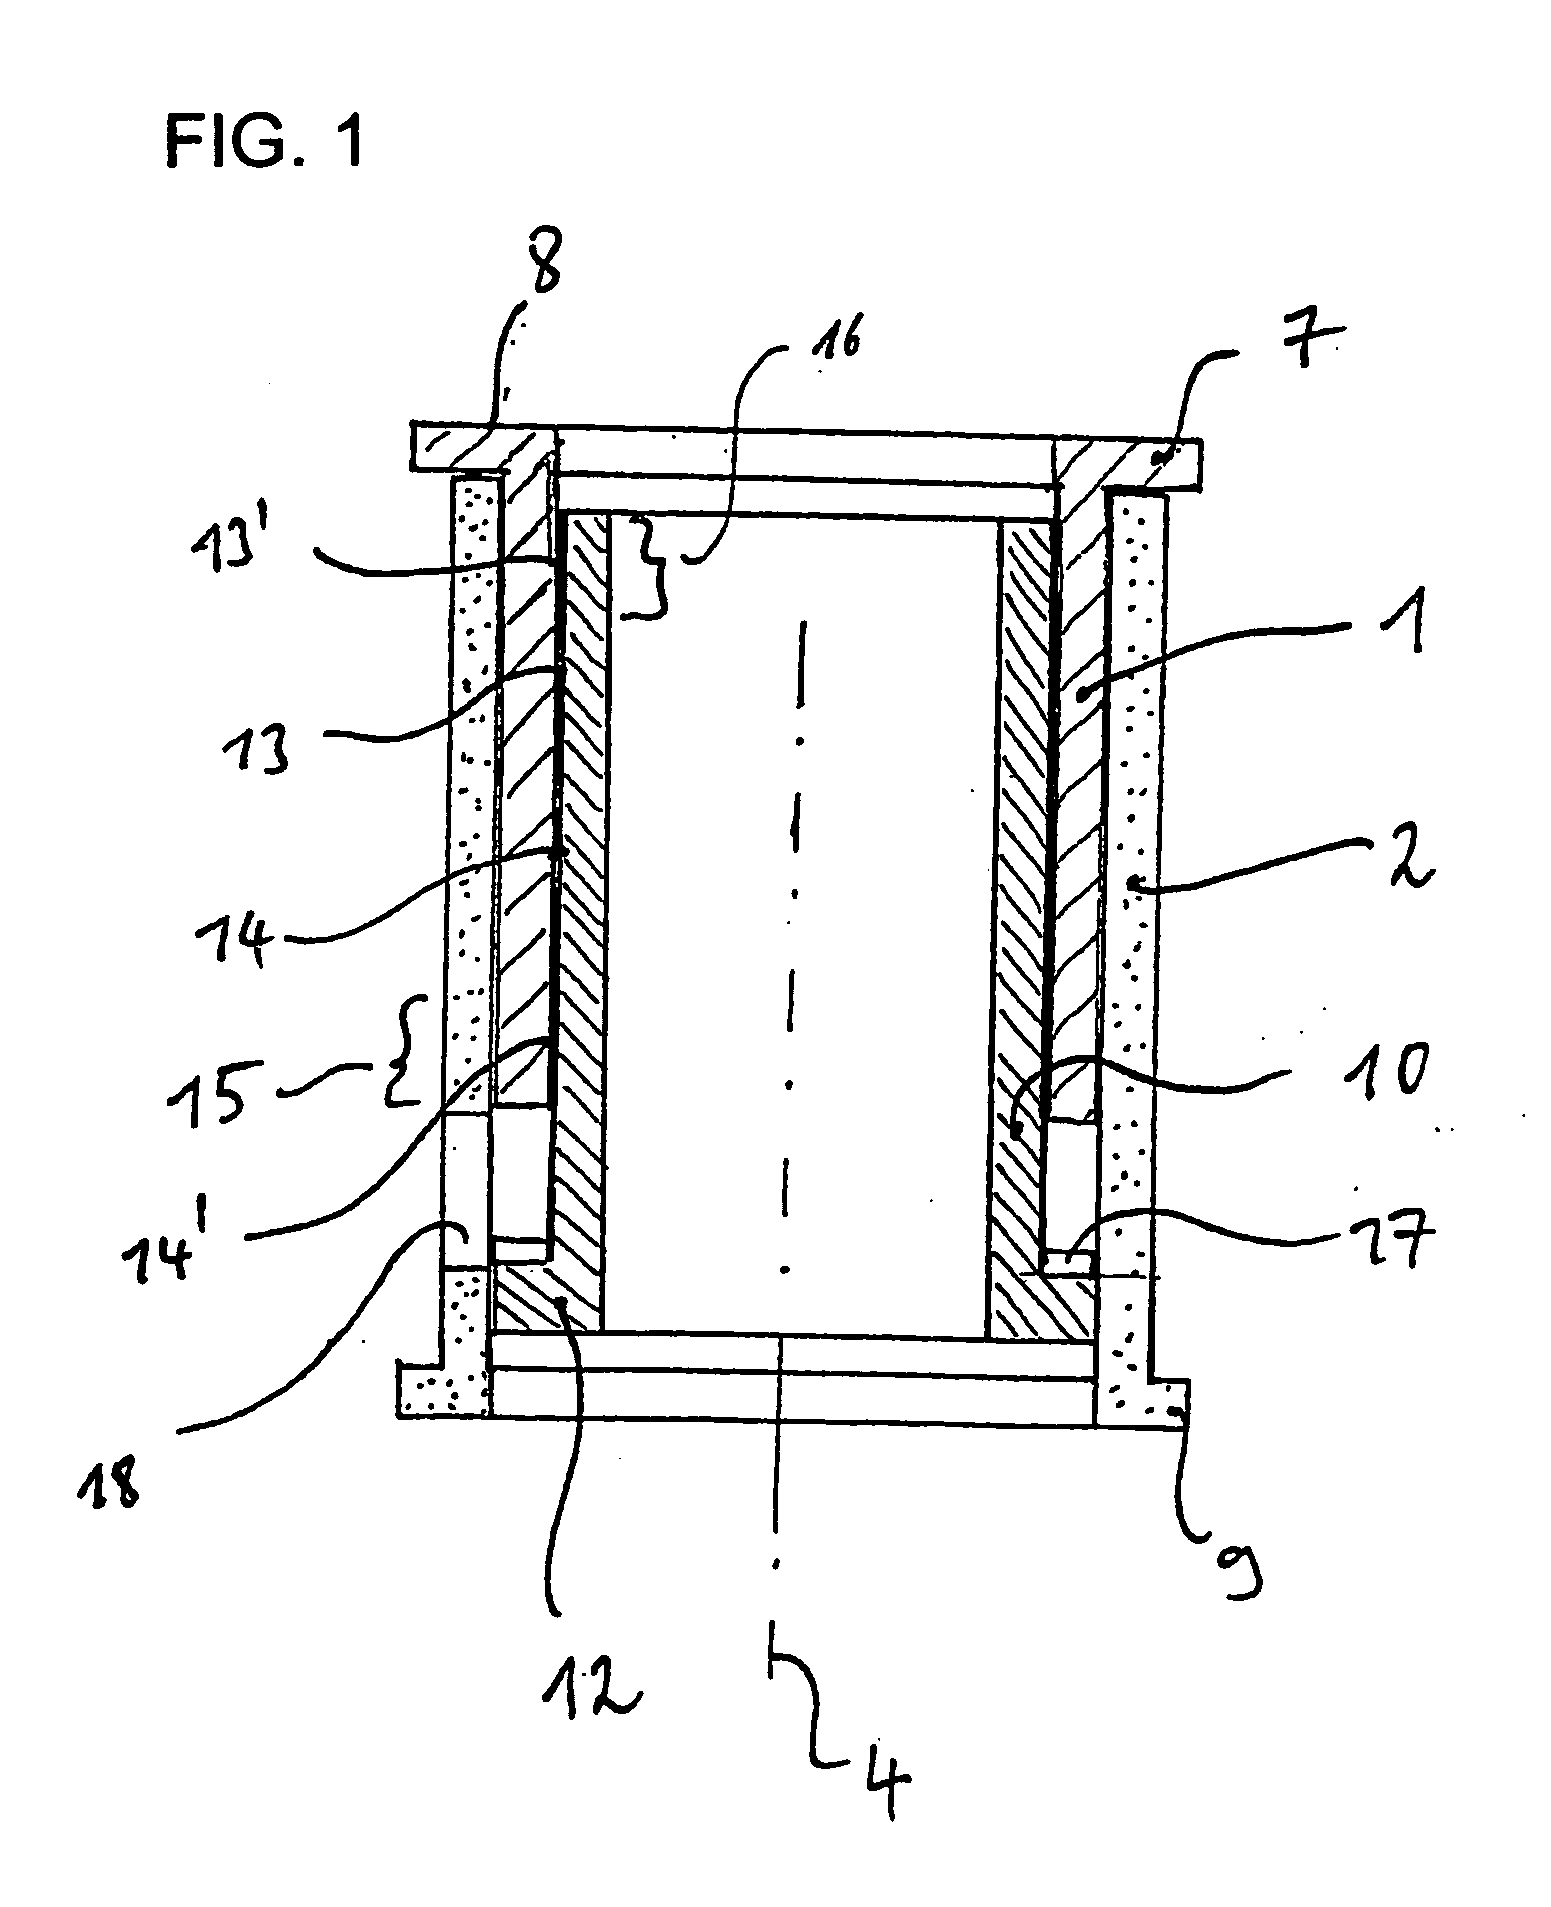 Height-adjustable spinal implant and operating instrument for the implant